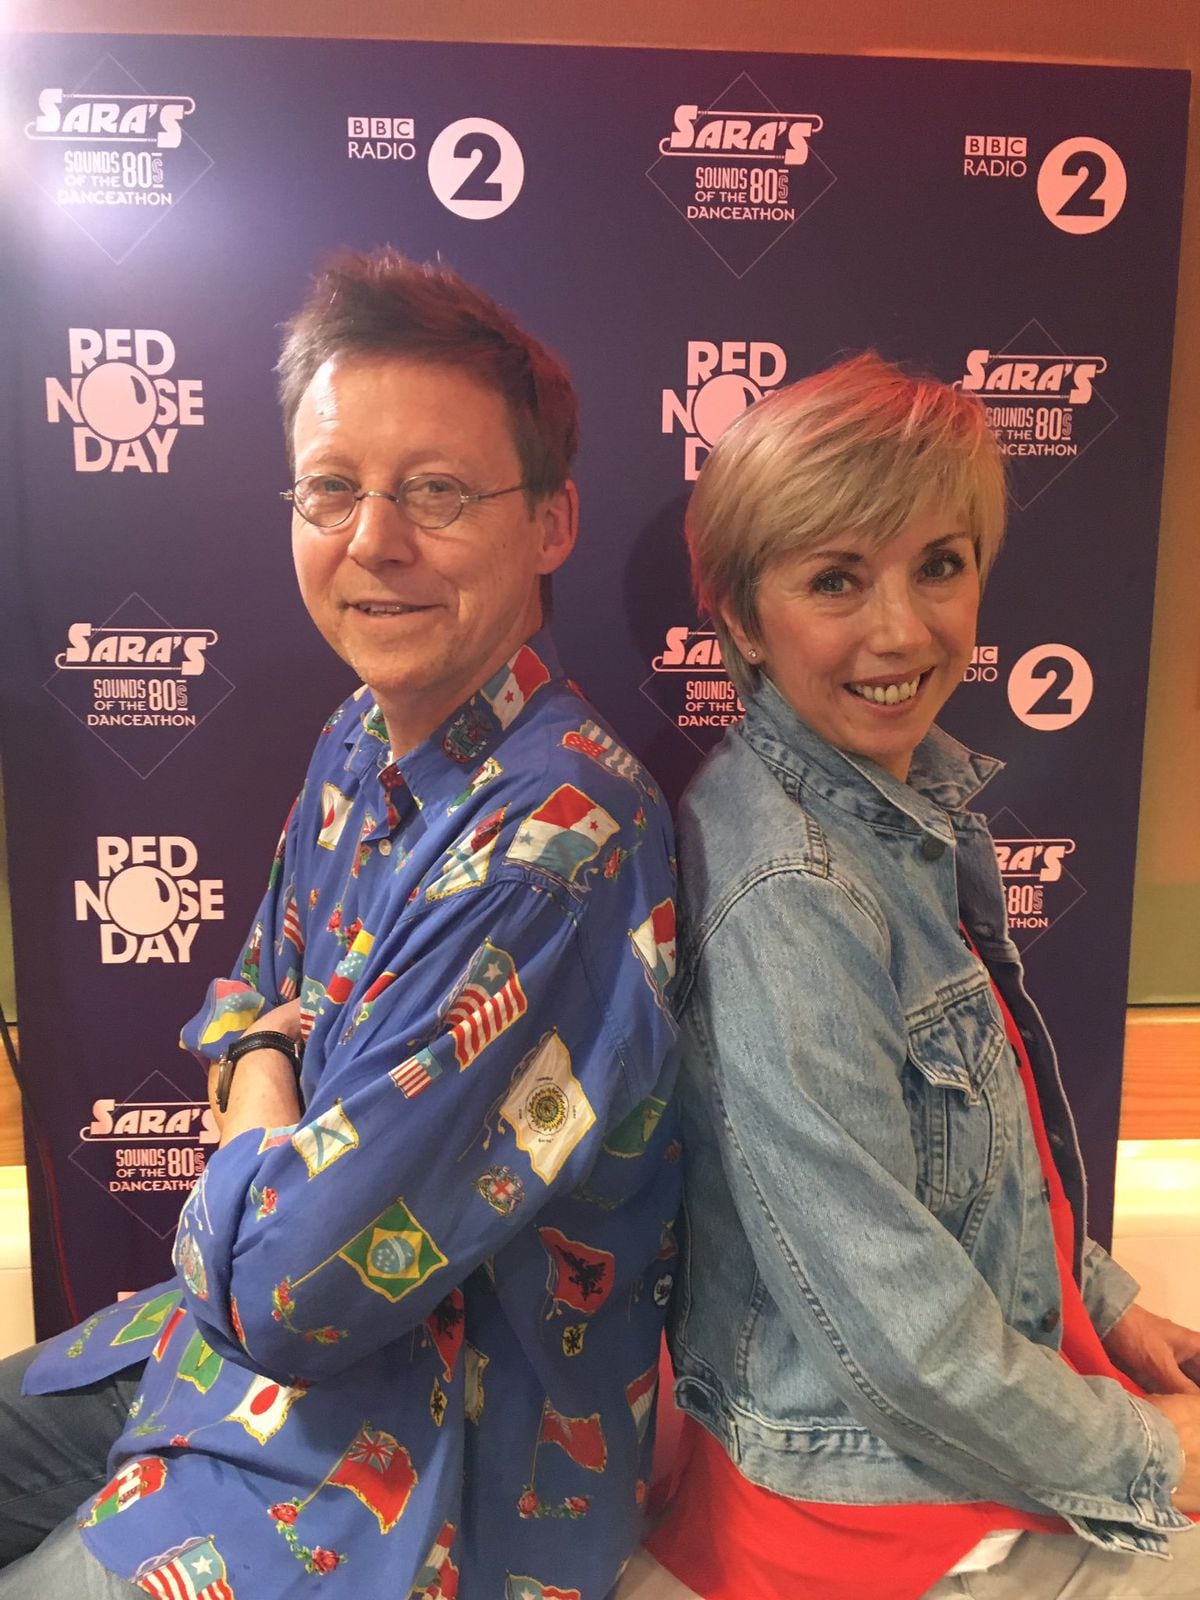 Back together – Simon Mayo and Sybil Ruscoe recreate their 1980s pose during a reunion organised for Red Nose Day